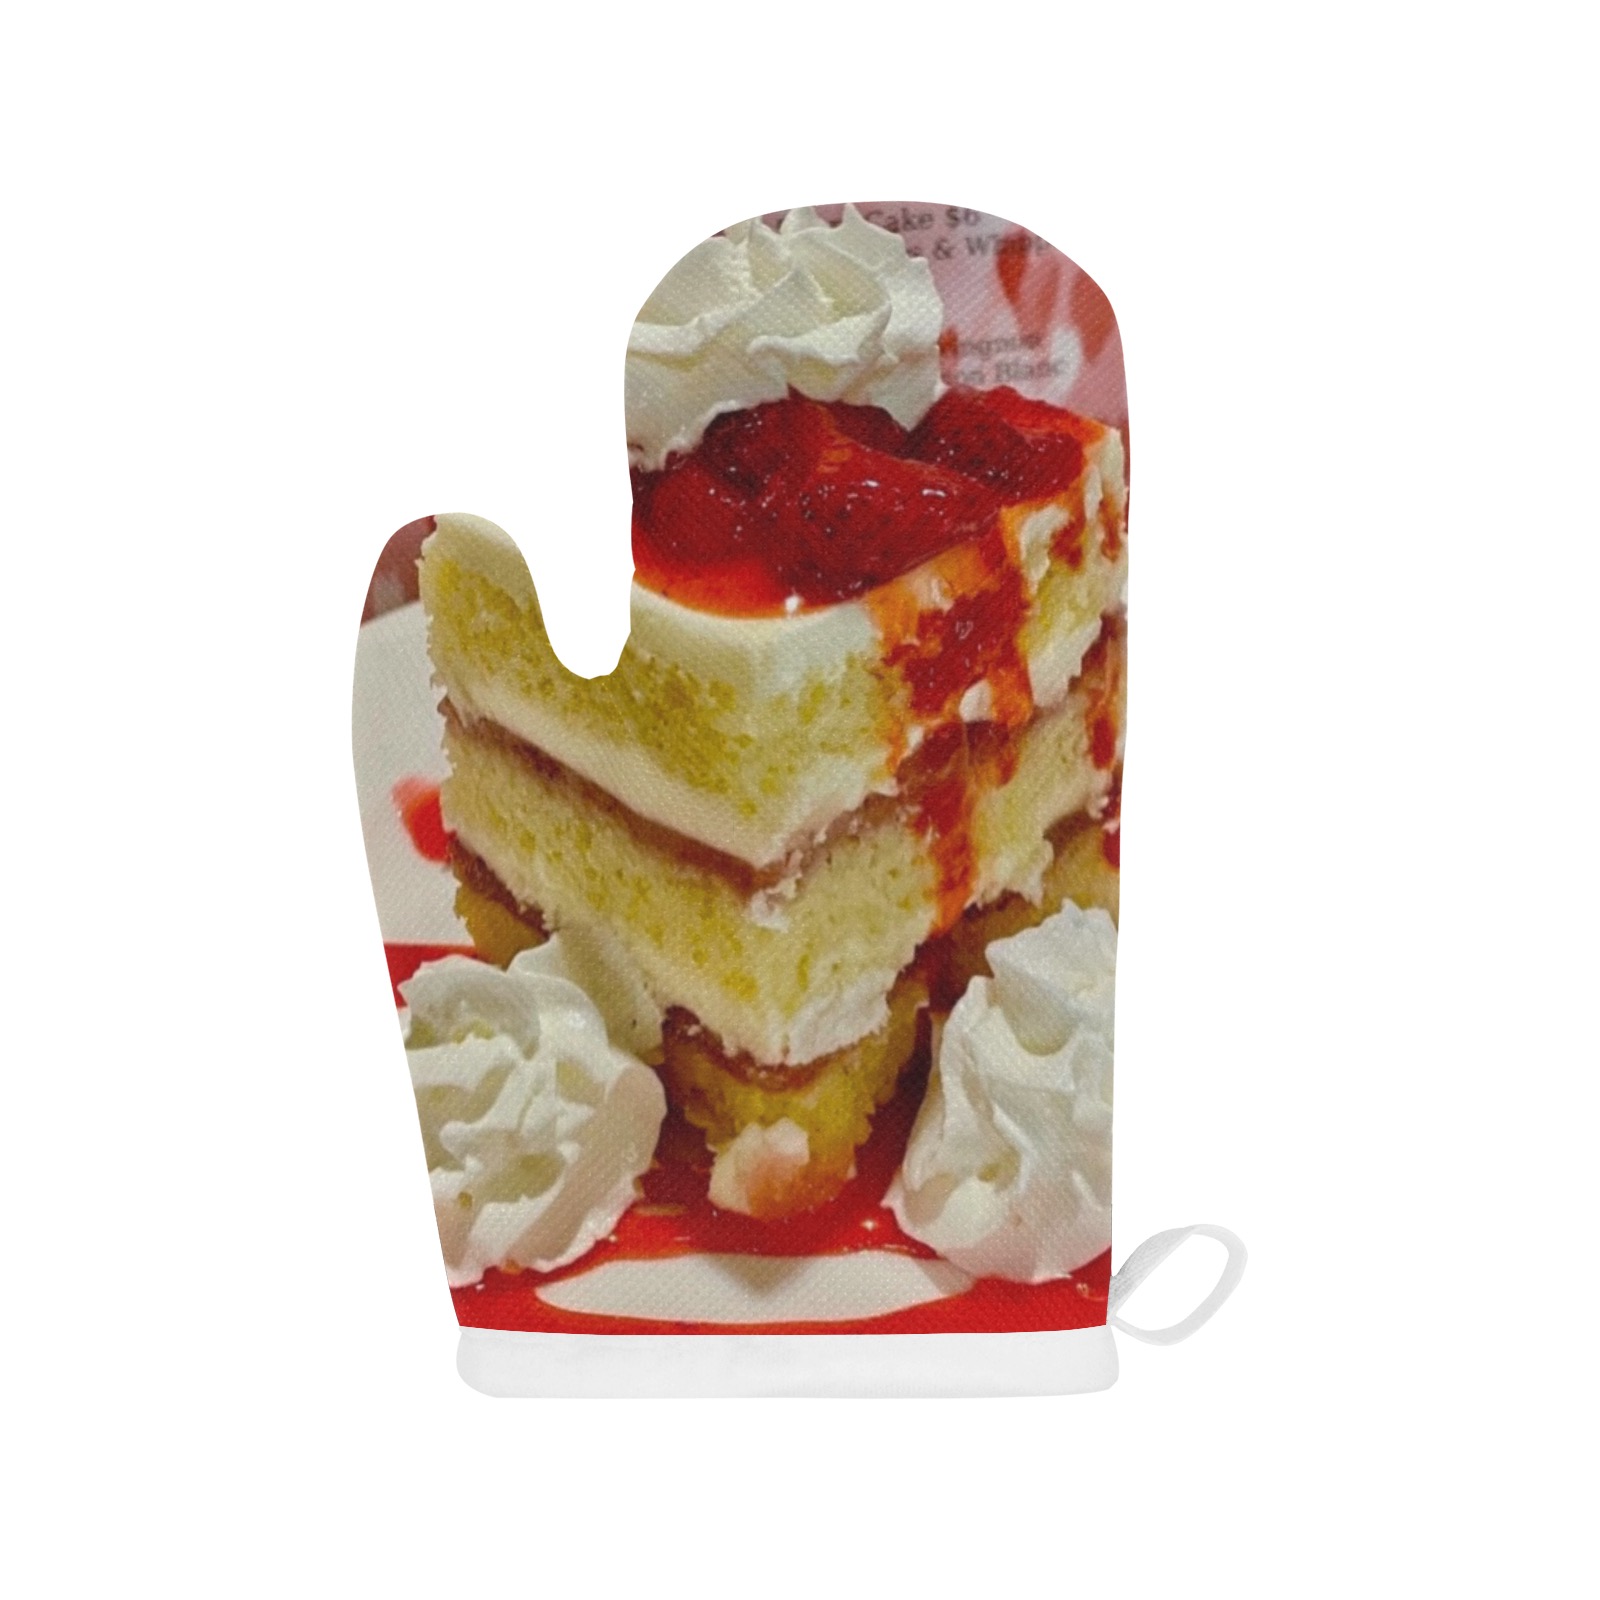 Strawberry Short cake Linen Oven Mitt (Two Pieces)